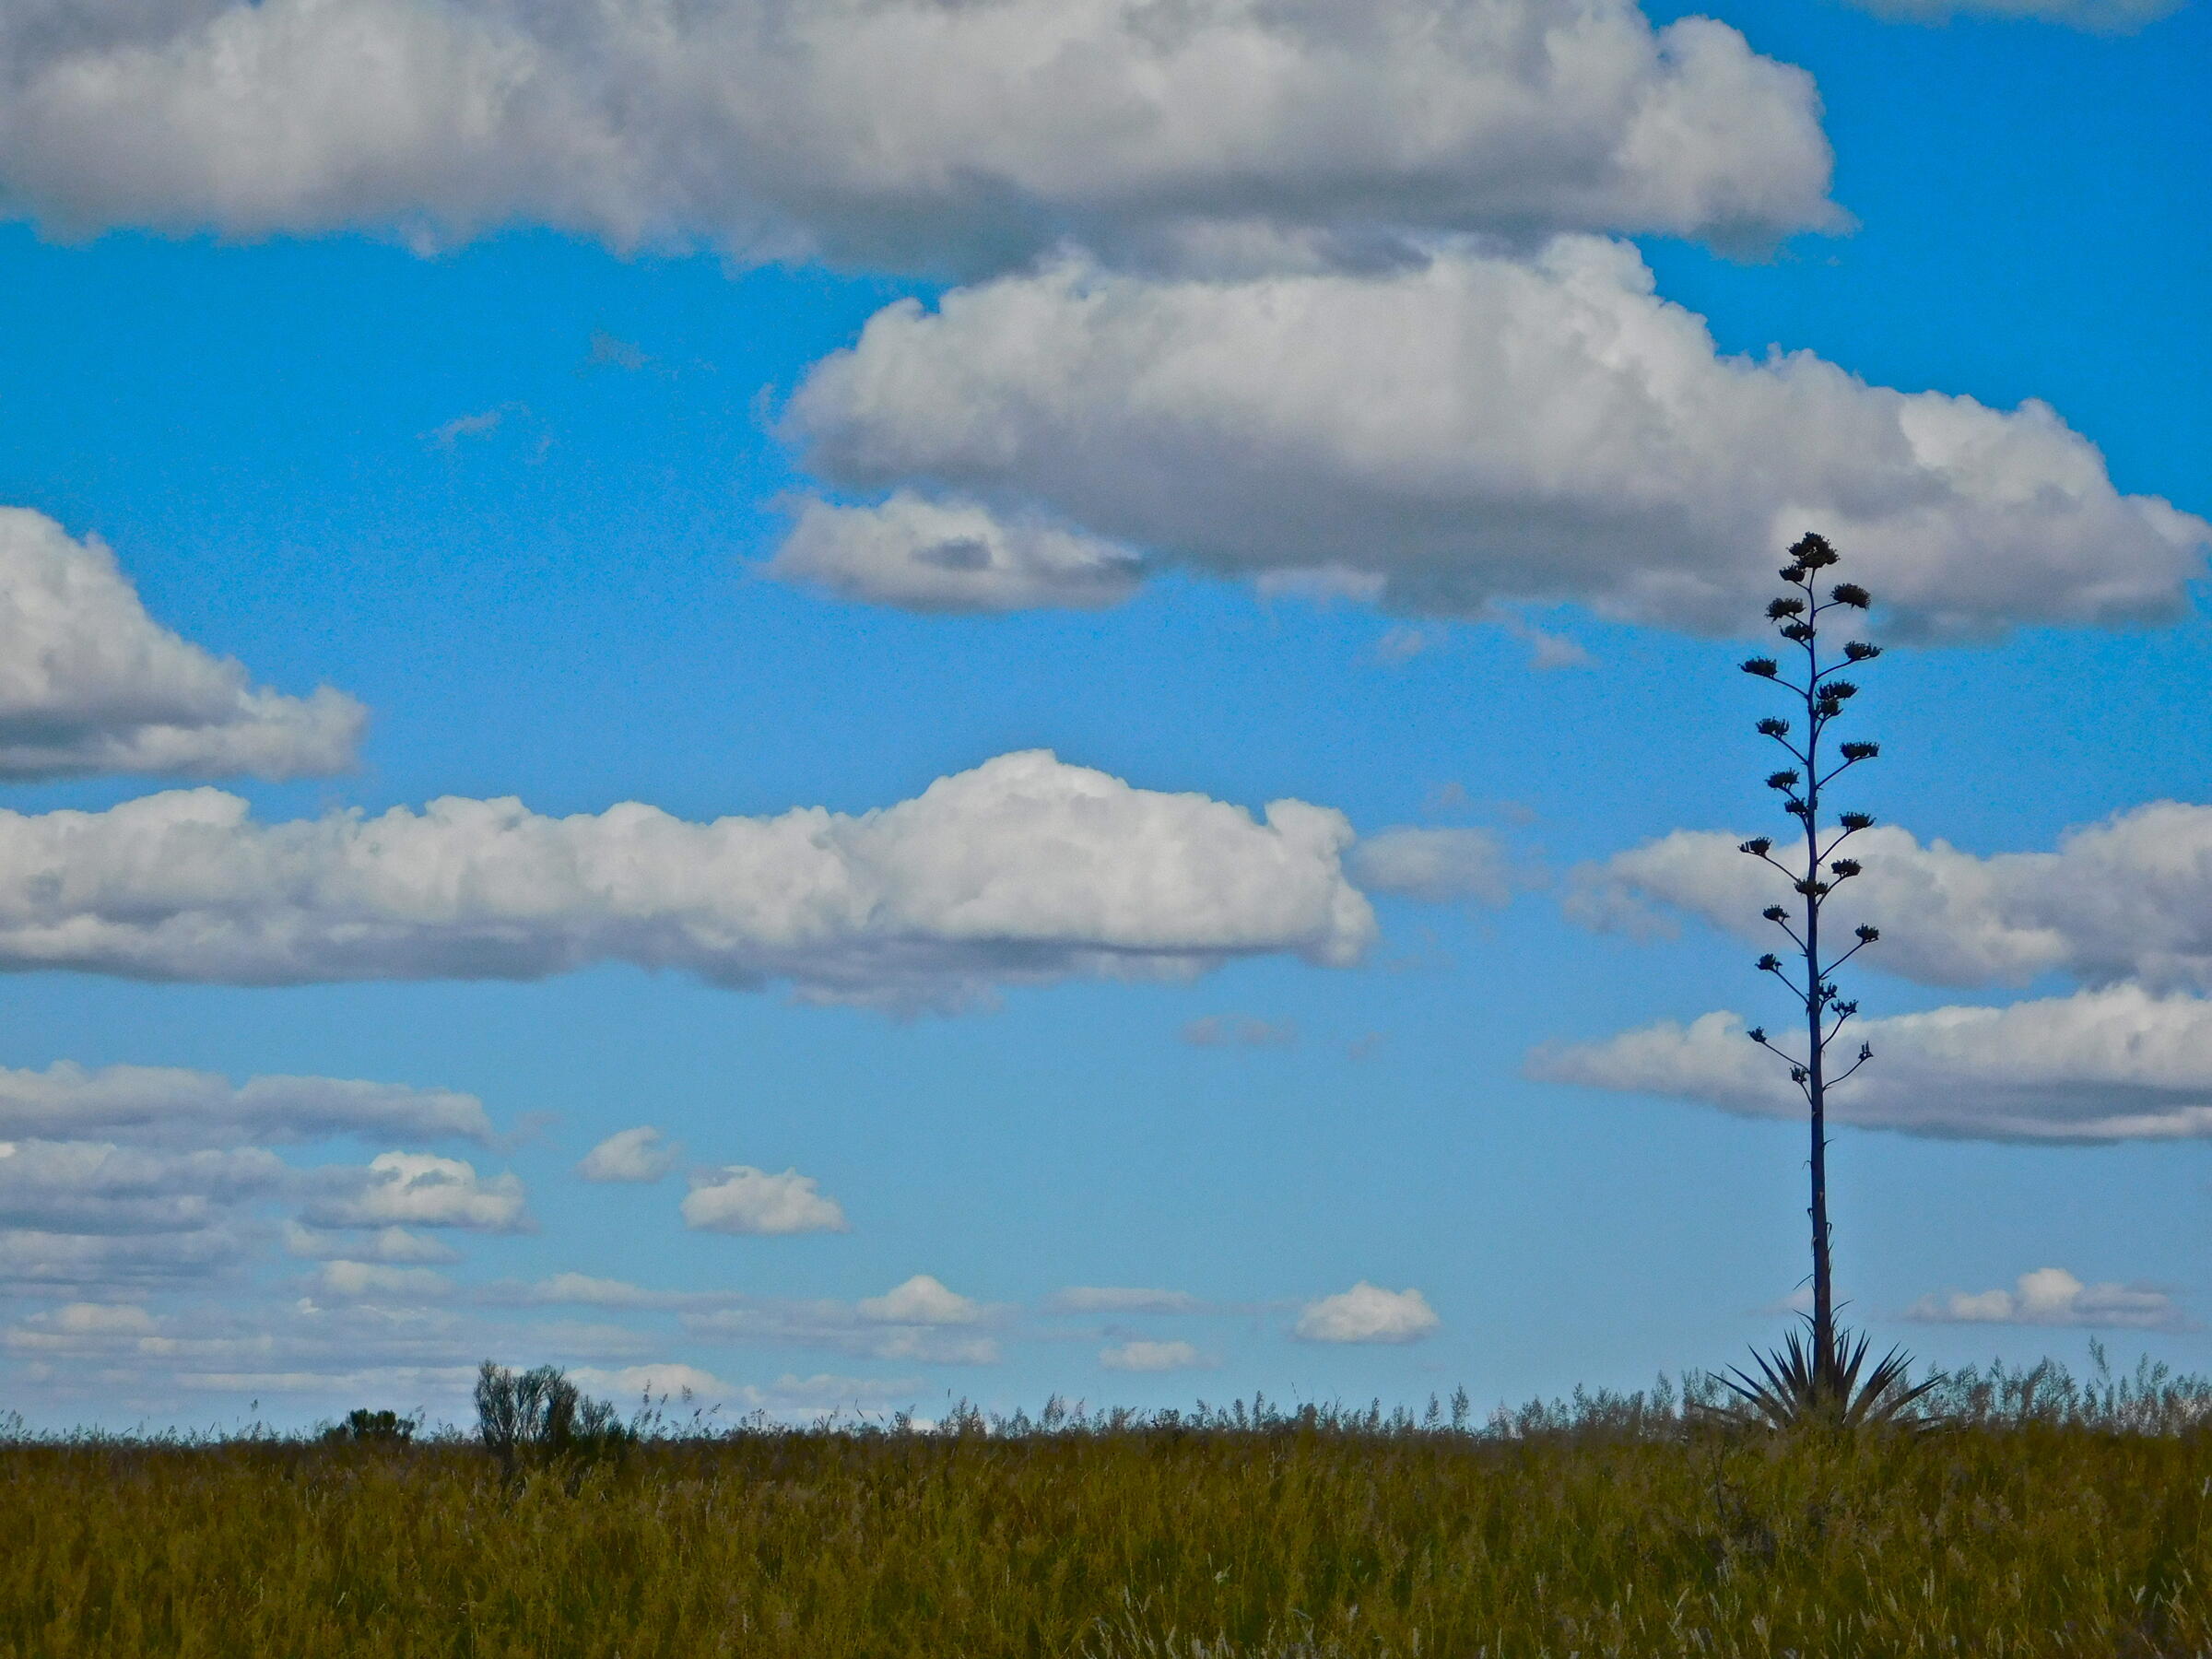 An agave stalk protrudes from the grasslands against a bright blue sky painted with puffy white clouds.